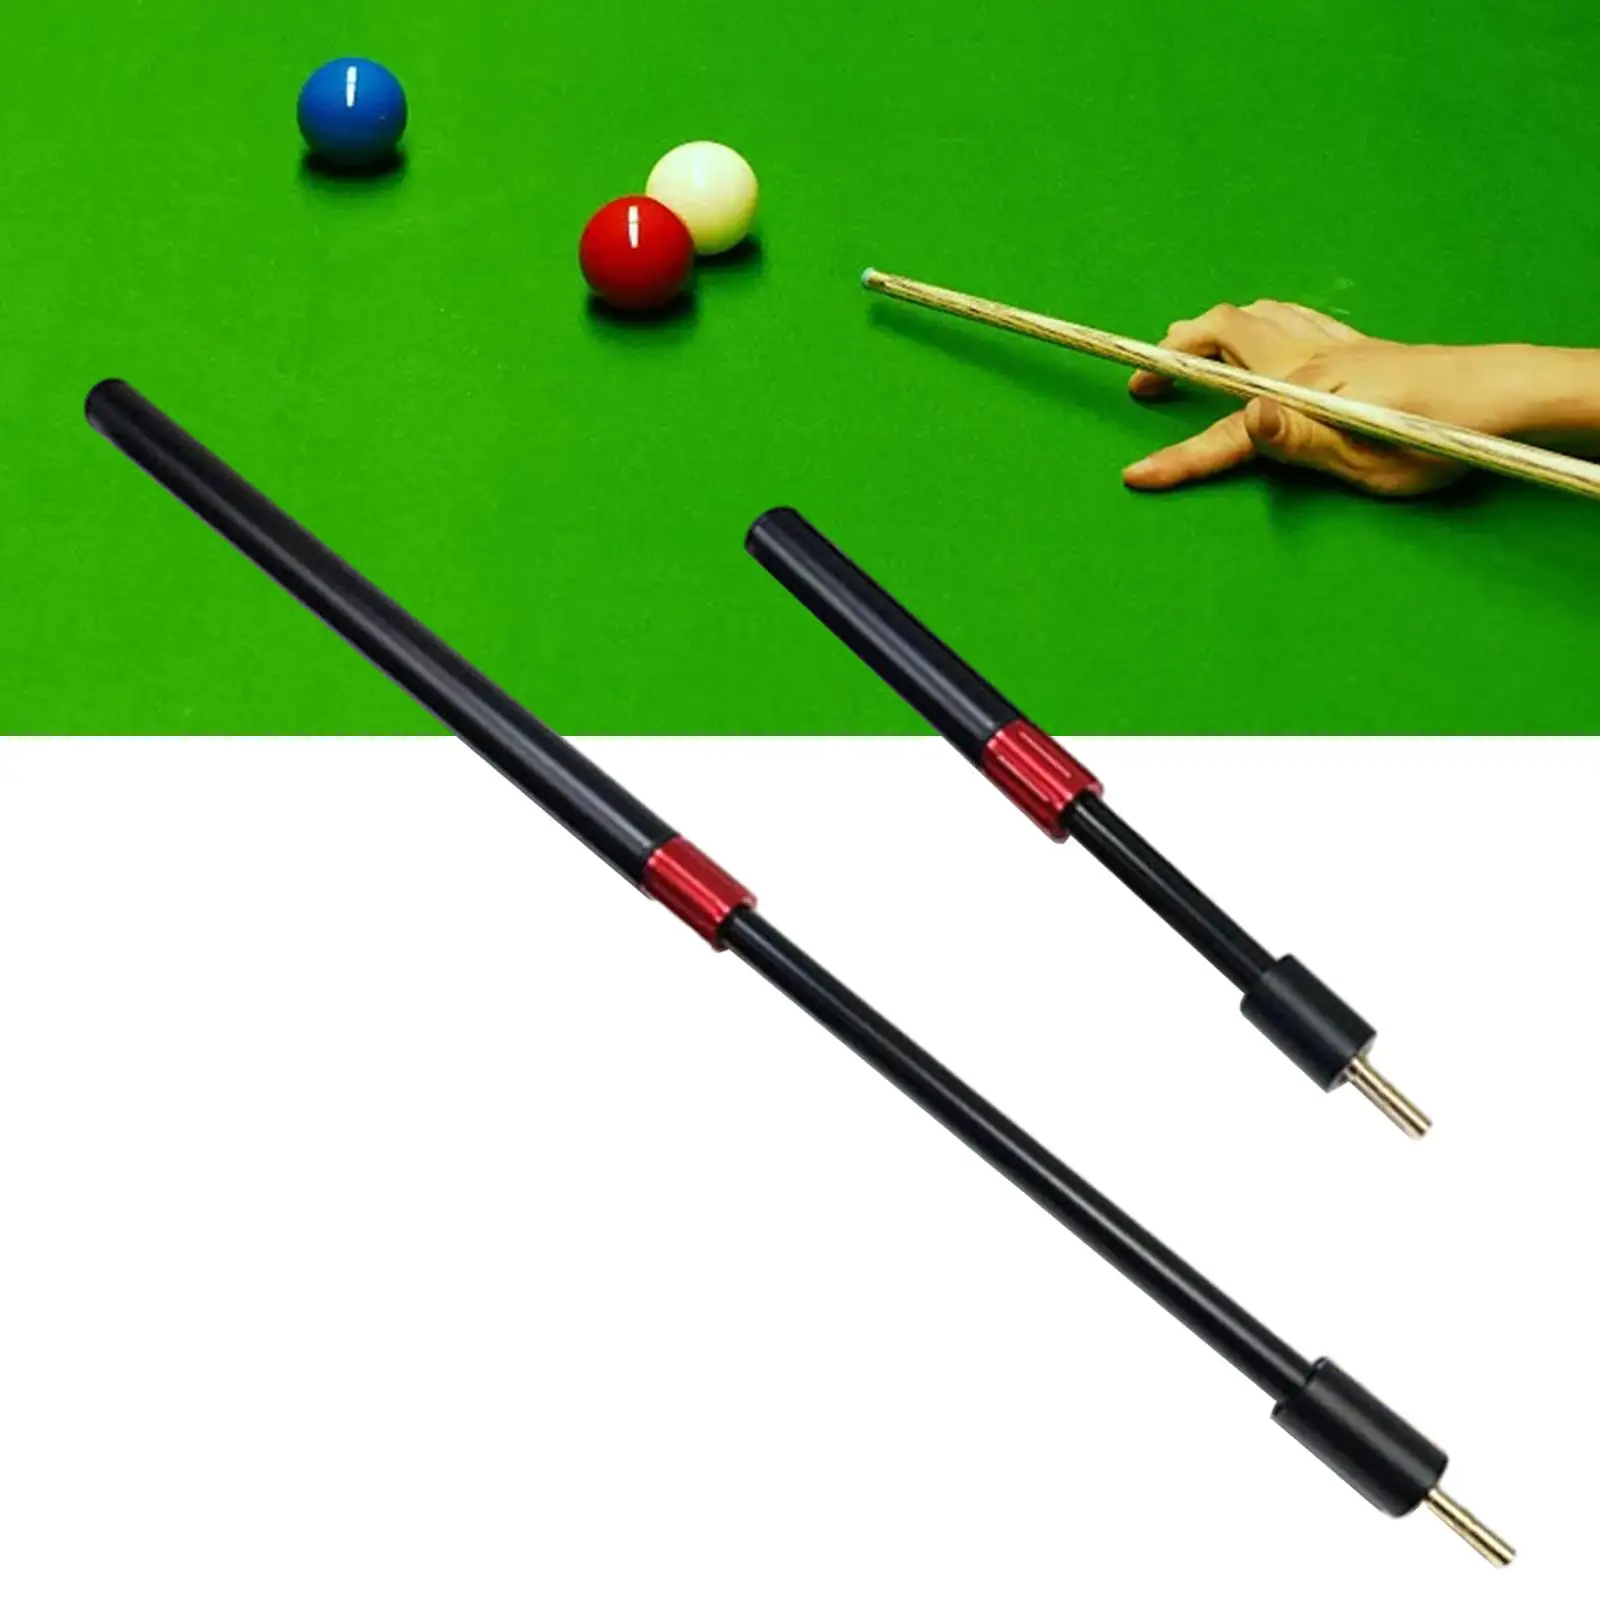 2Pcs Billiards Cue Extension 9inch 18inch Pool Cue Extender End Lengthener